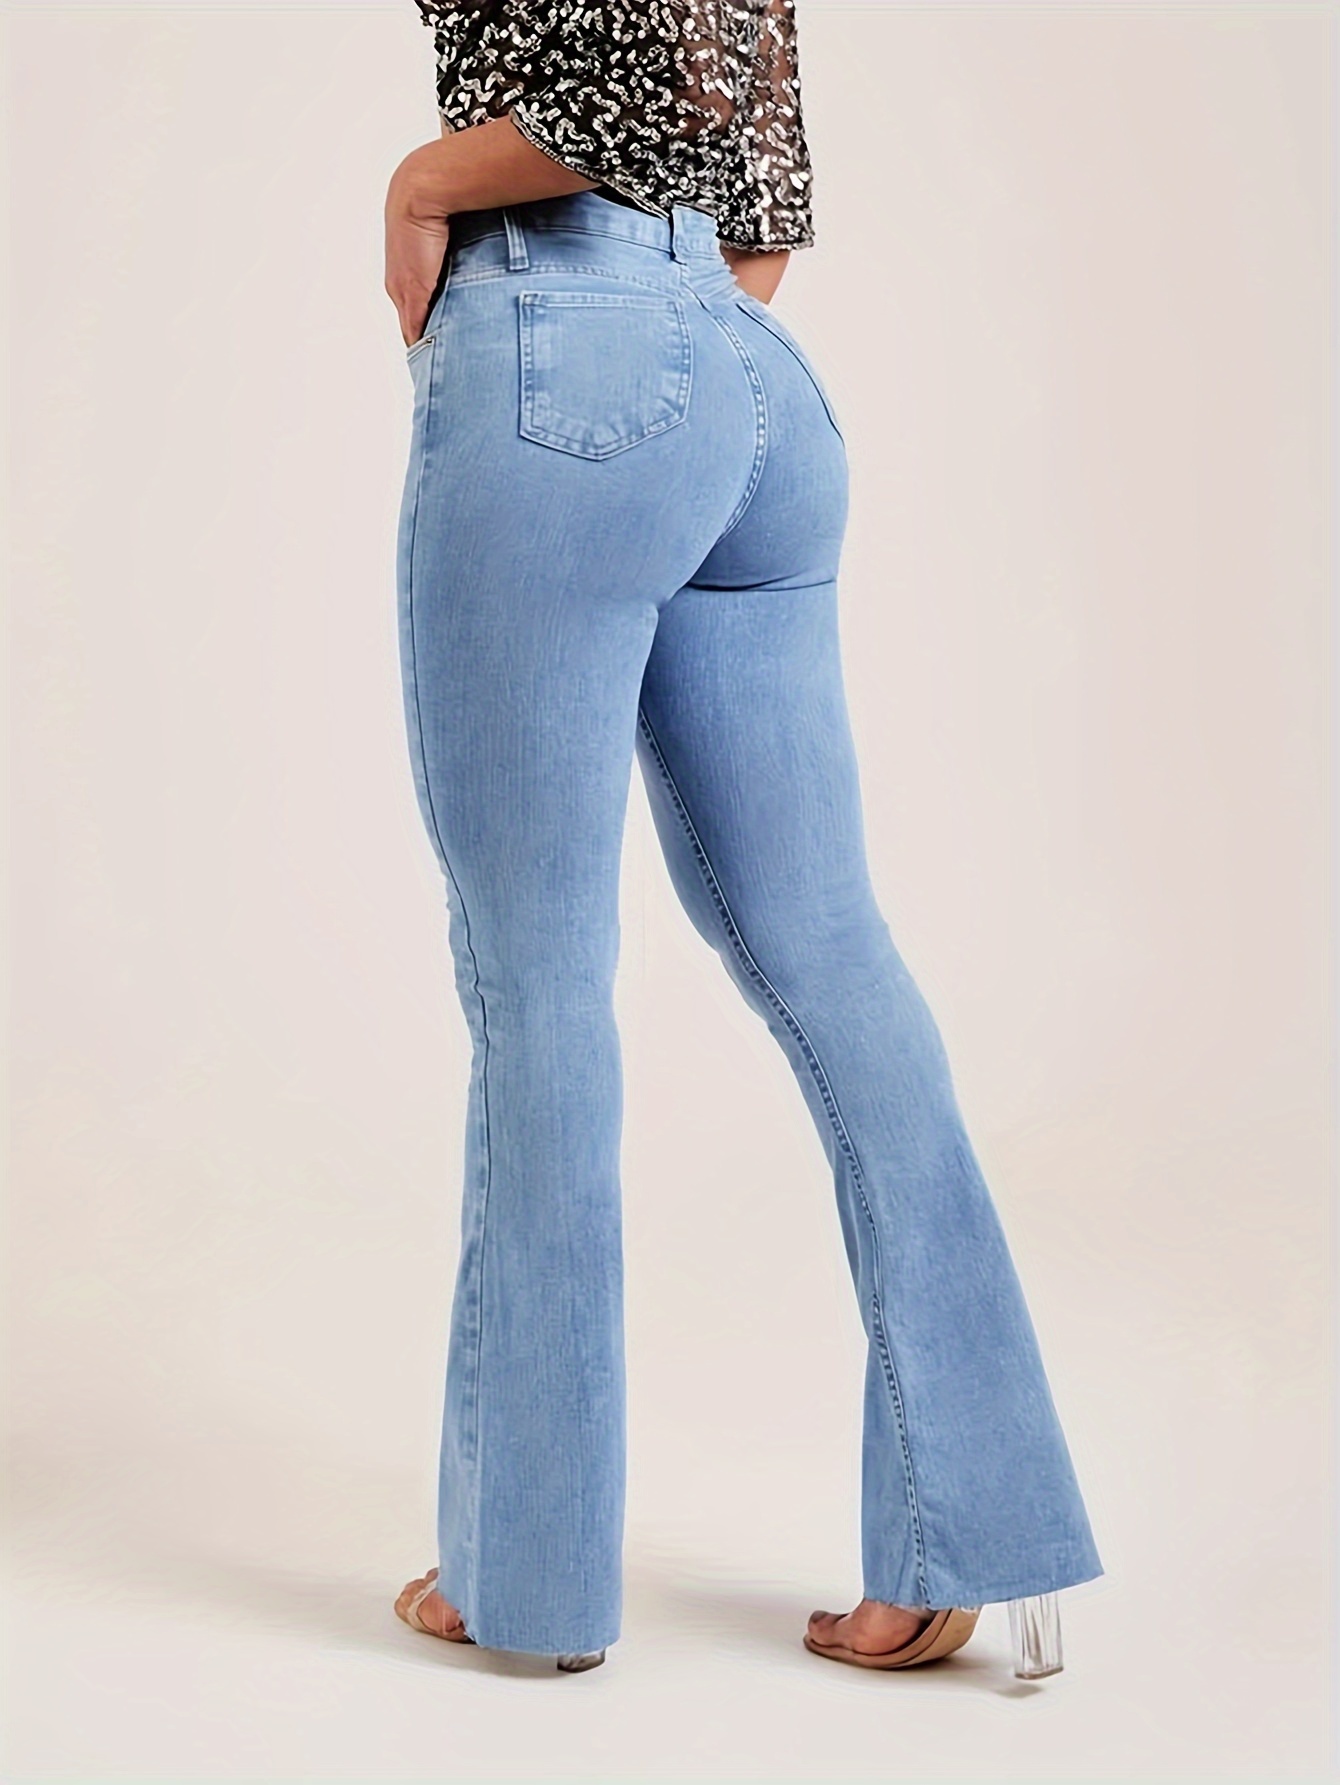 Pants For Women Work Casual Ladies Popular Flare Jeans Ladies Fashion Mid  Waist Flare Stretch Slim Long Retro Jeans Hot Style Plus Size 20 Tall